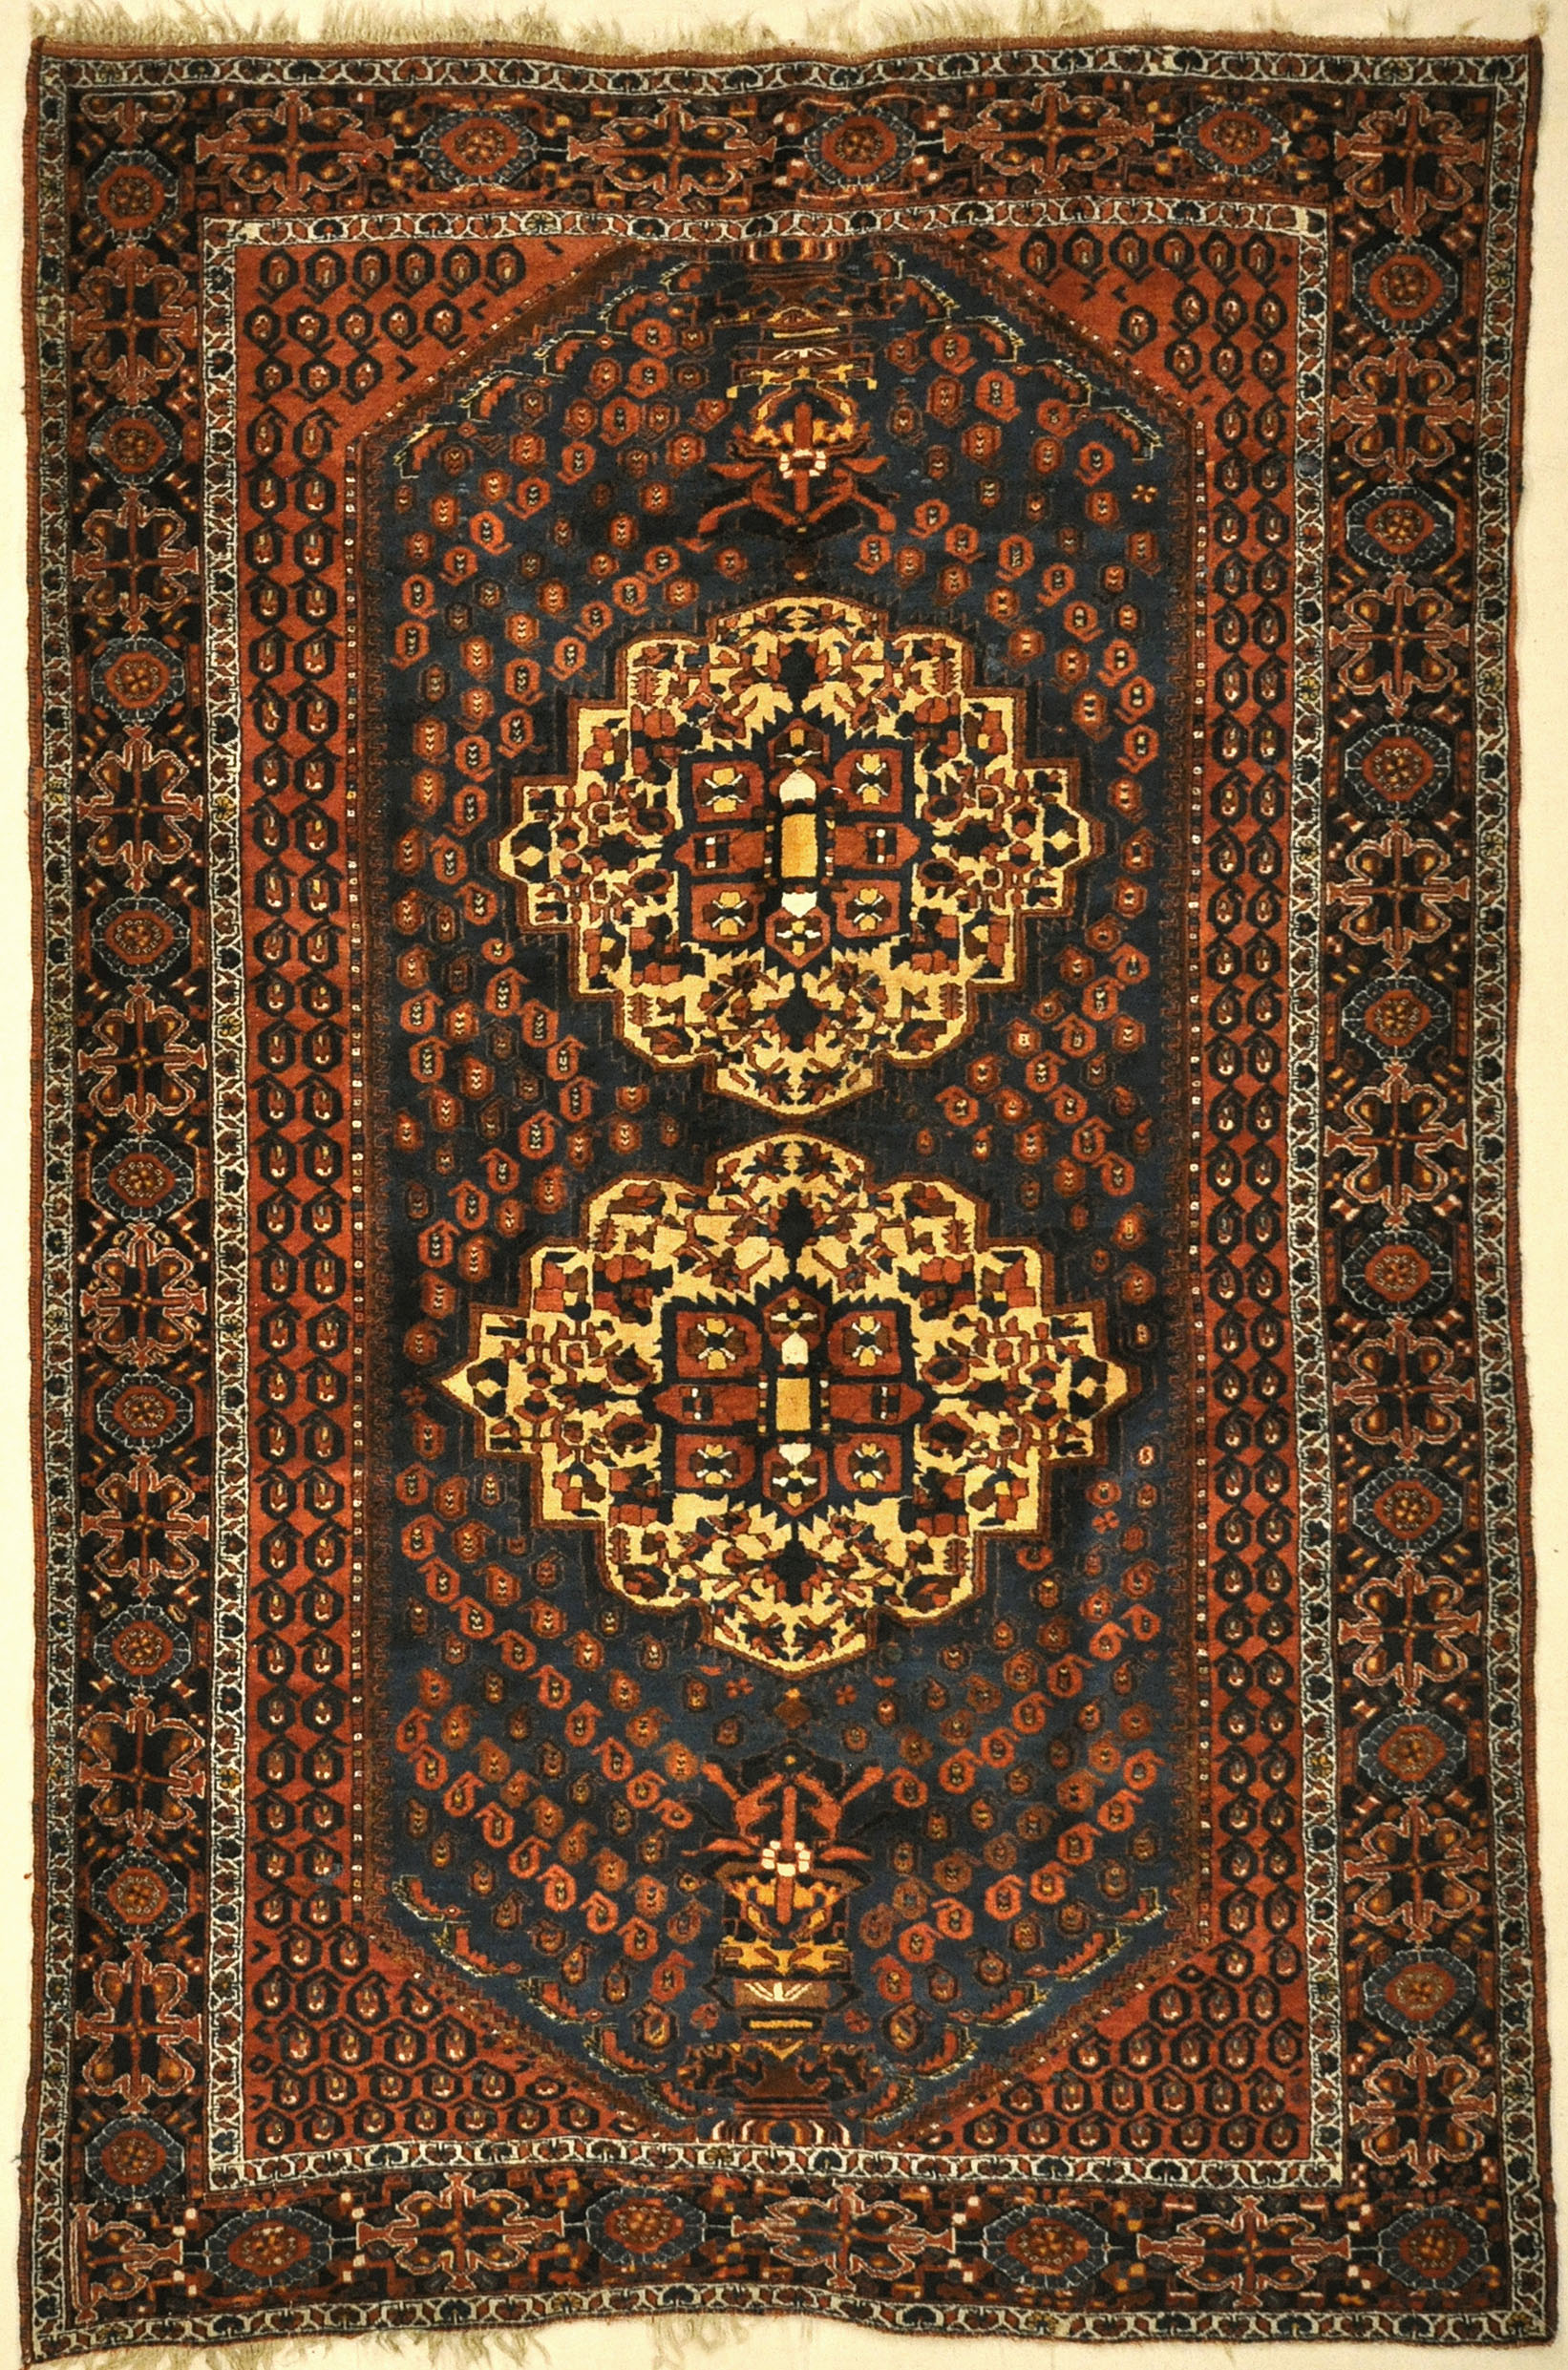 Antique Intricate Boteh Afshar Rug. A piece of genuine authentic antique woven carpet art sold by Santa Barbara Design Center, Rugs and More.